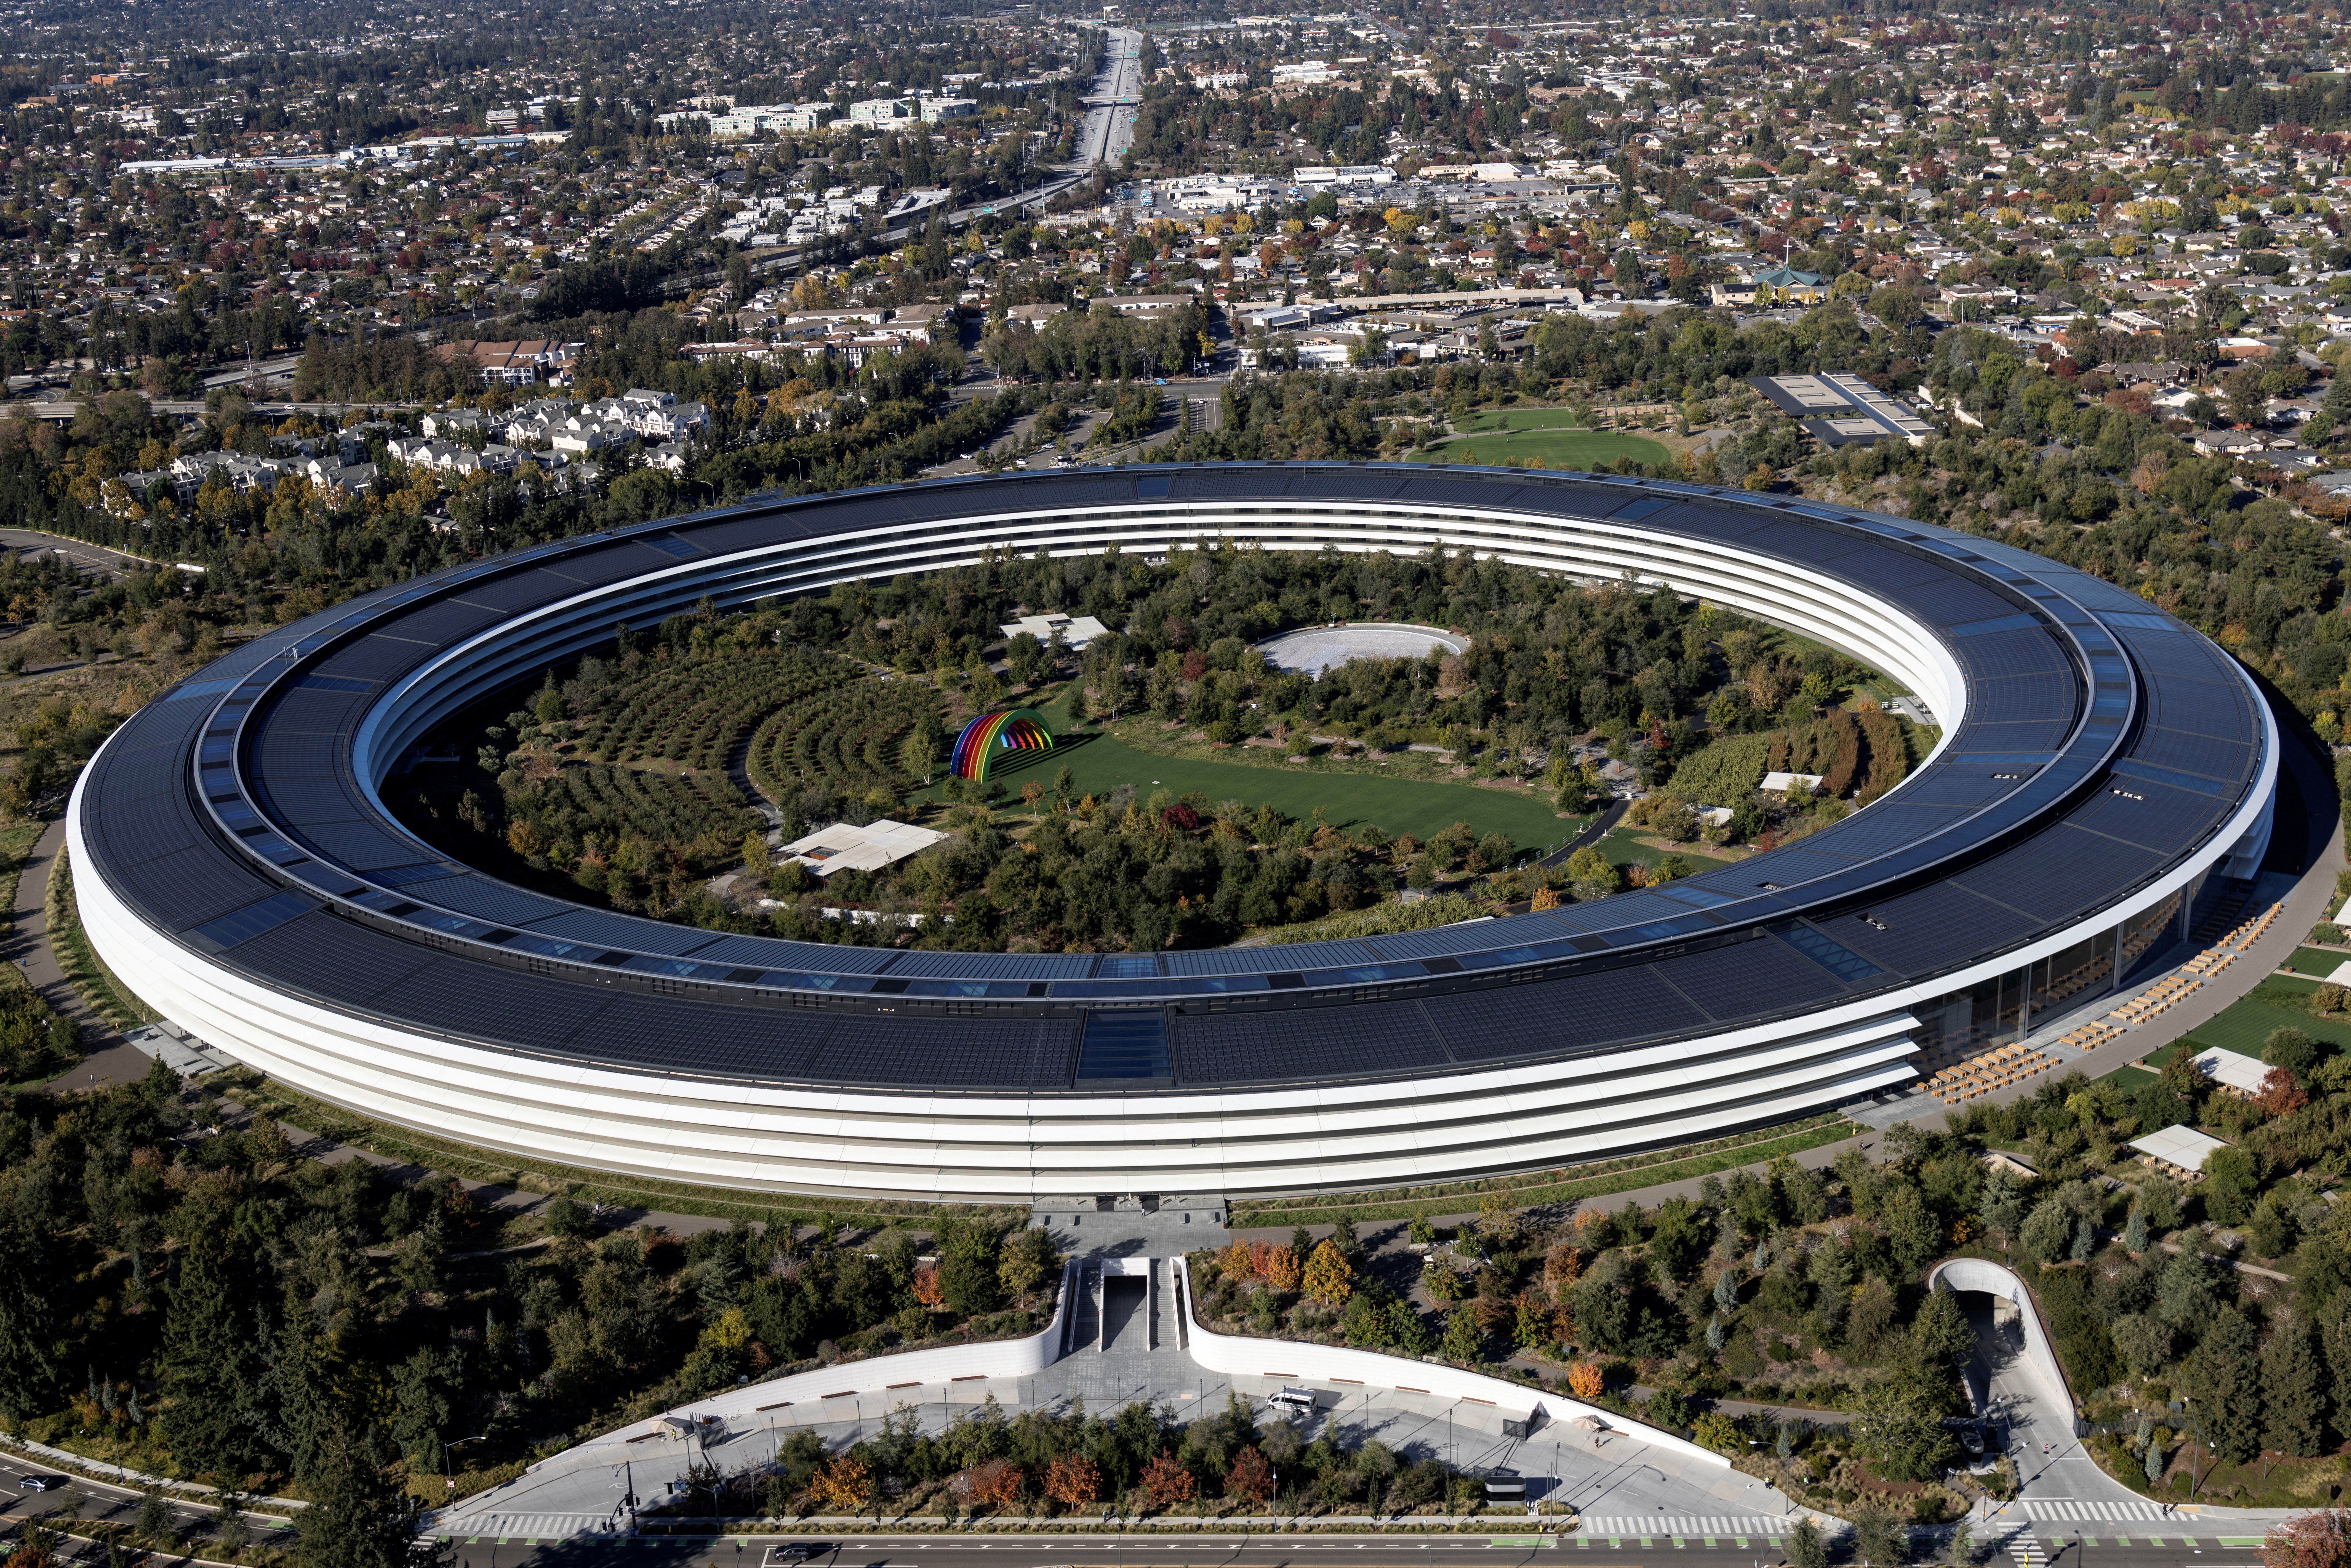 Aerial view of Apple's headquarters in Cupertino, California